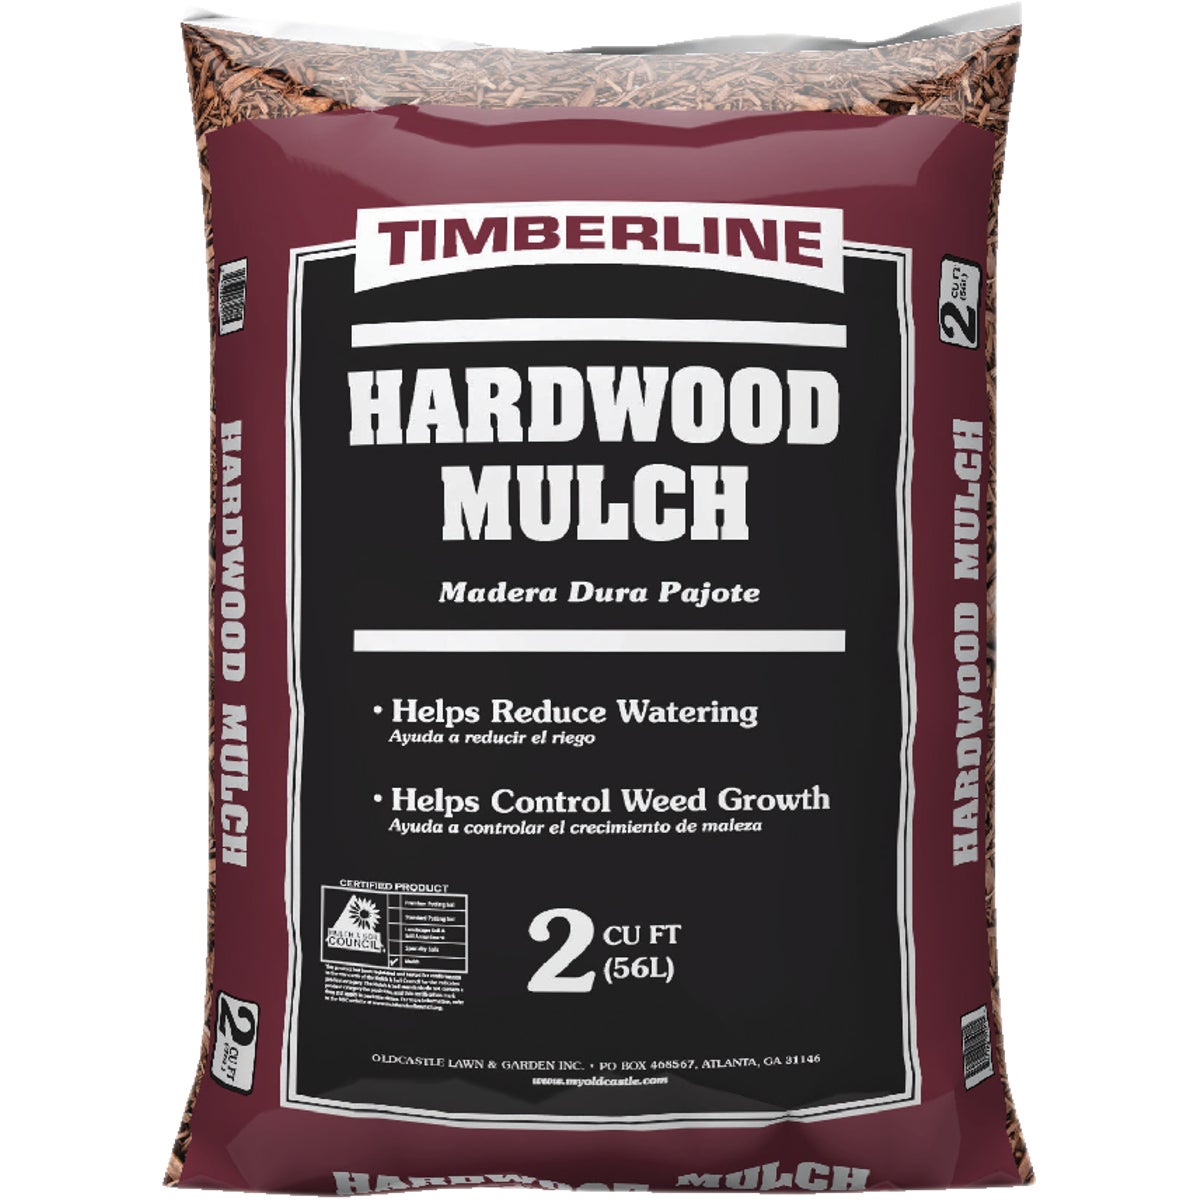 Item 703895, Hardwood mulch ideal to add beautiful color to any outdoor area.